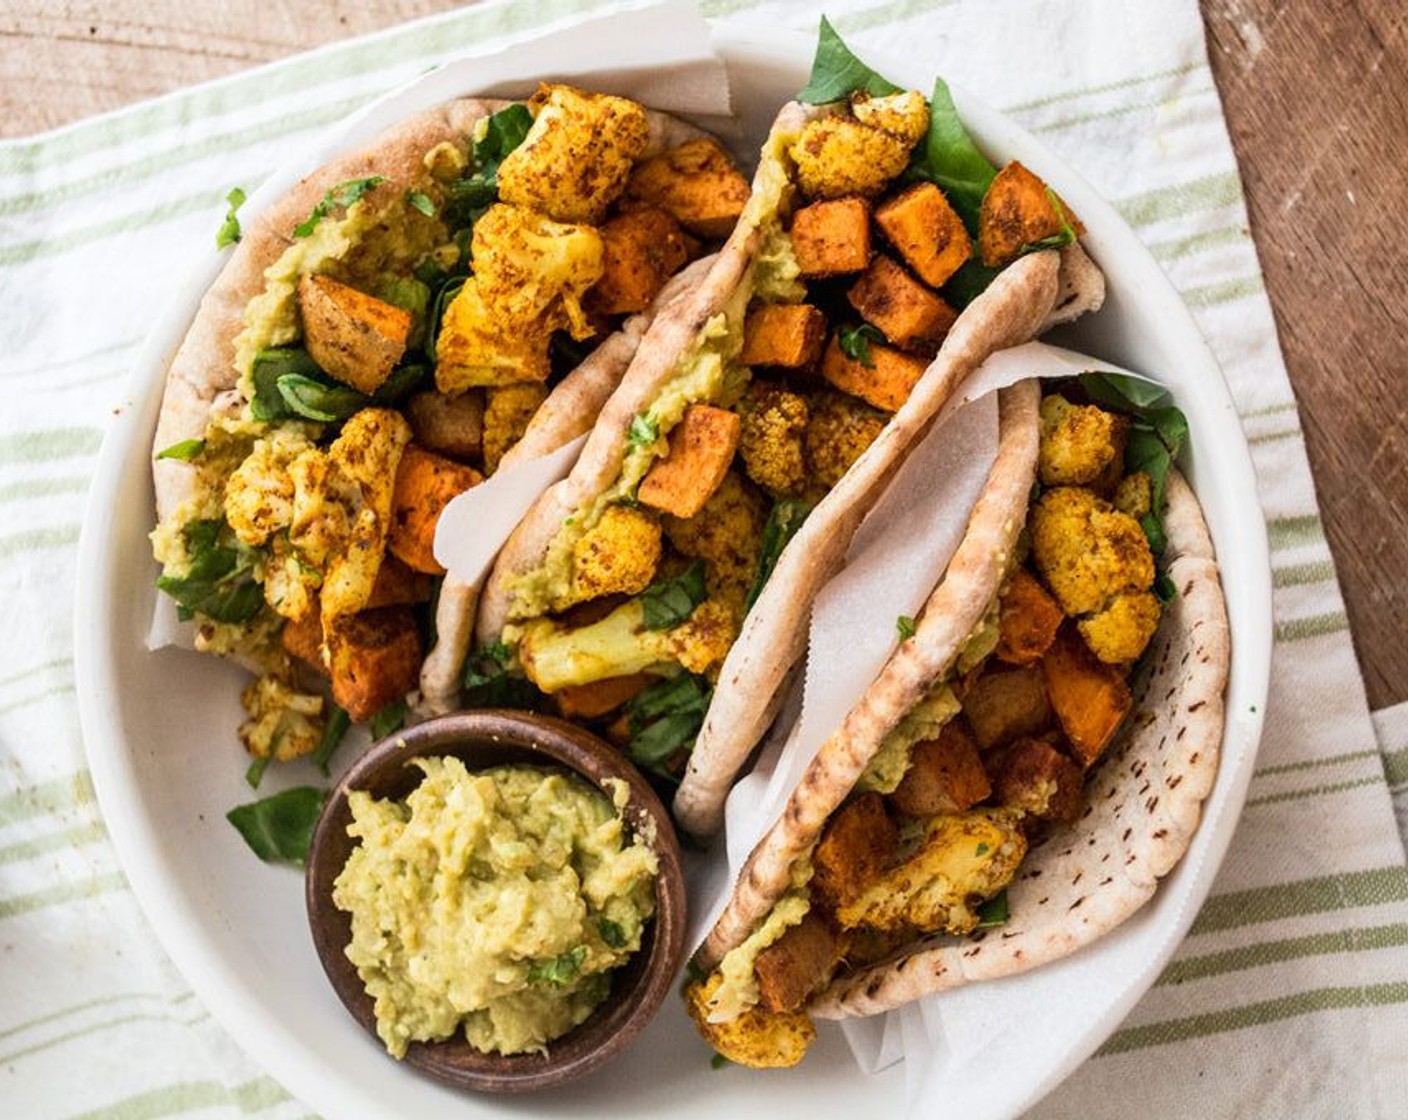 step 6 Once vegetables have cooked, add avocado hummus to pita or Naans (6 pieces) followed by Fresh Spinach (1 cup) then the cooked sweet potatoes and cauliflower, top with Cheese (to taste), if desired.